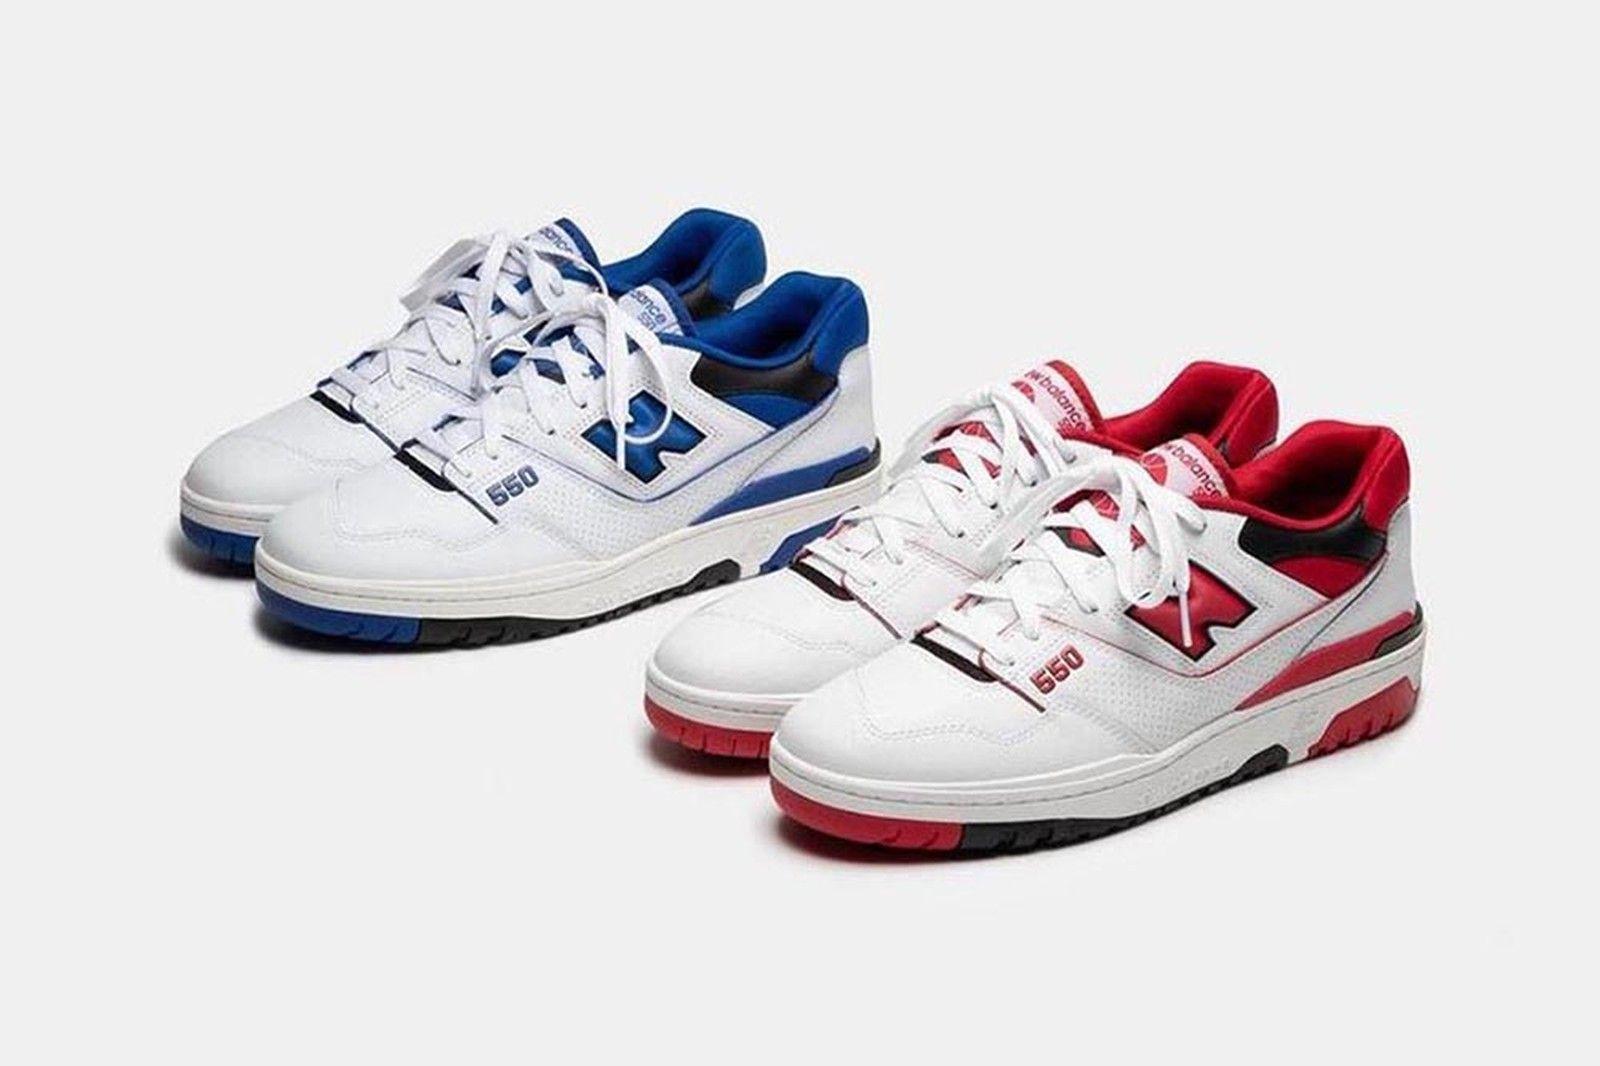 Aim Leon Dores New Balance 550s Are Dropping in General Release